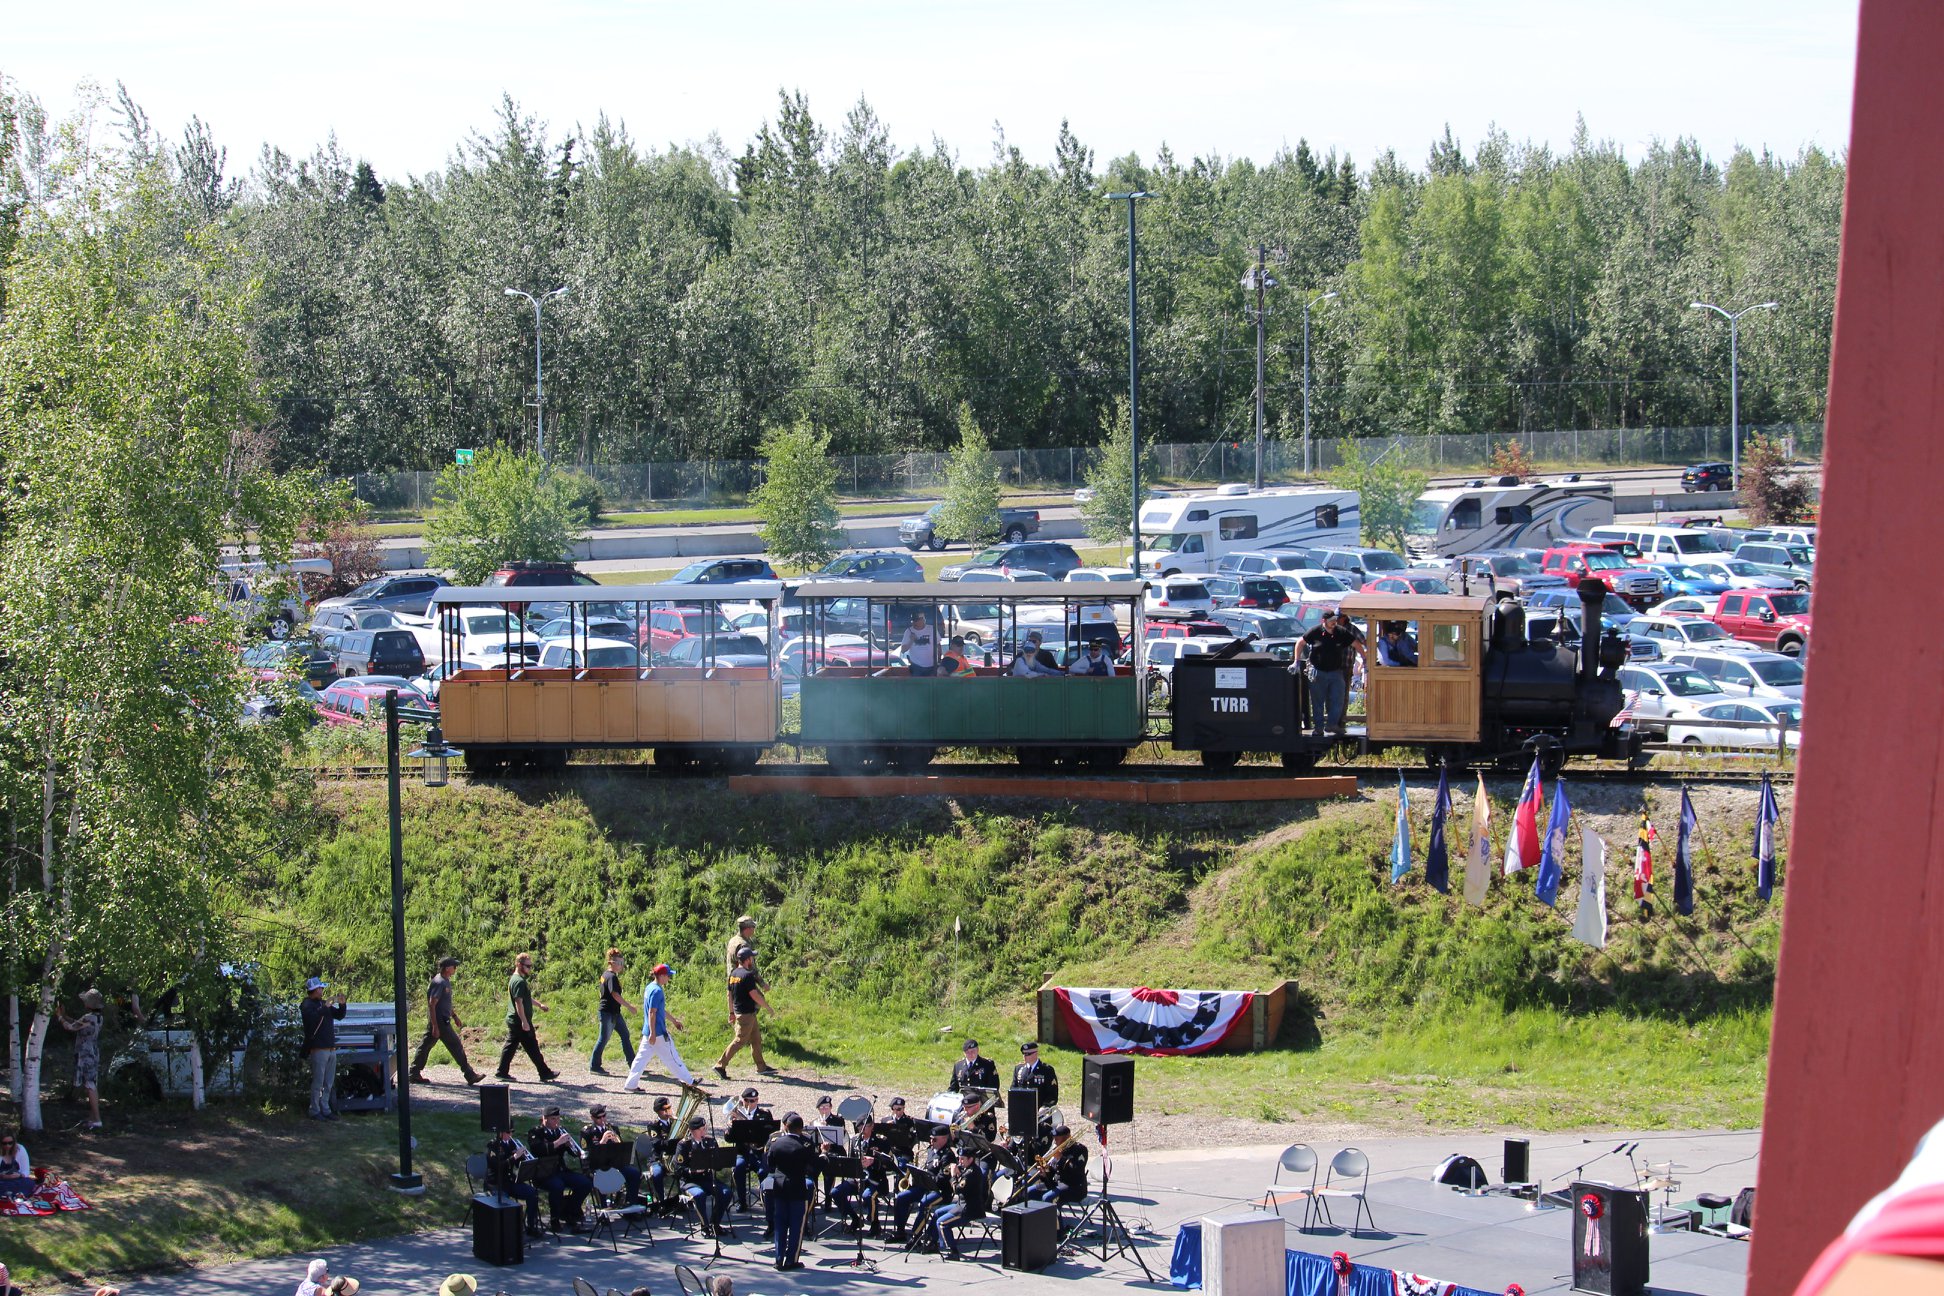 Small passenger train at a community park with crowd in foreground